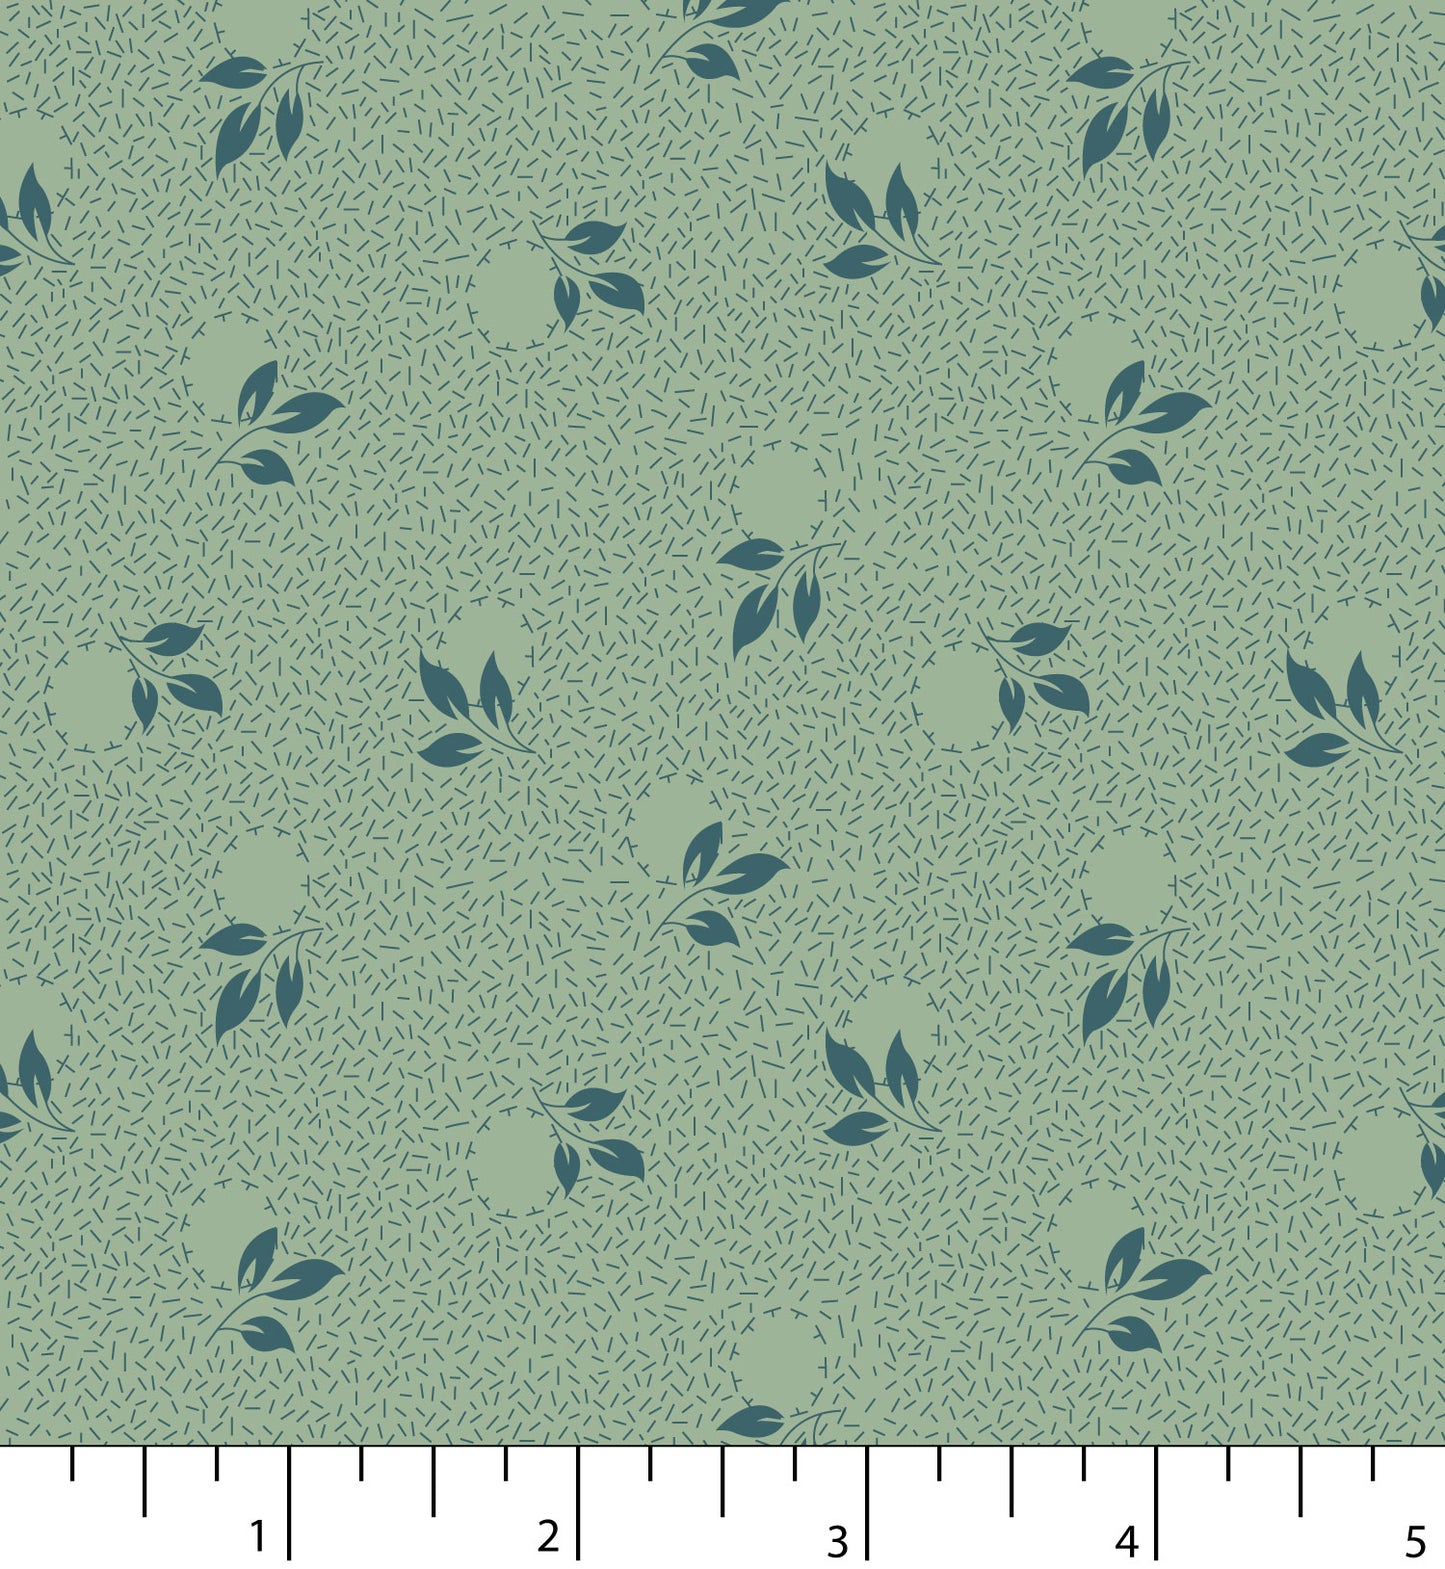 Back & Forth - Foliage - Glacier Blue - Licence To Quilt